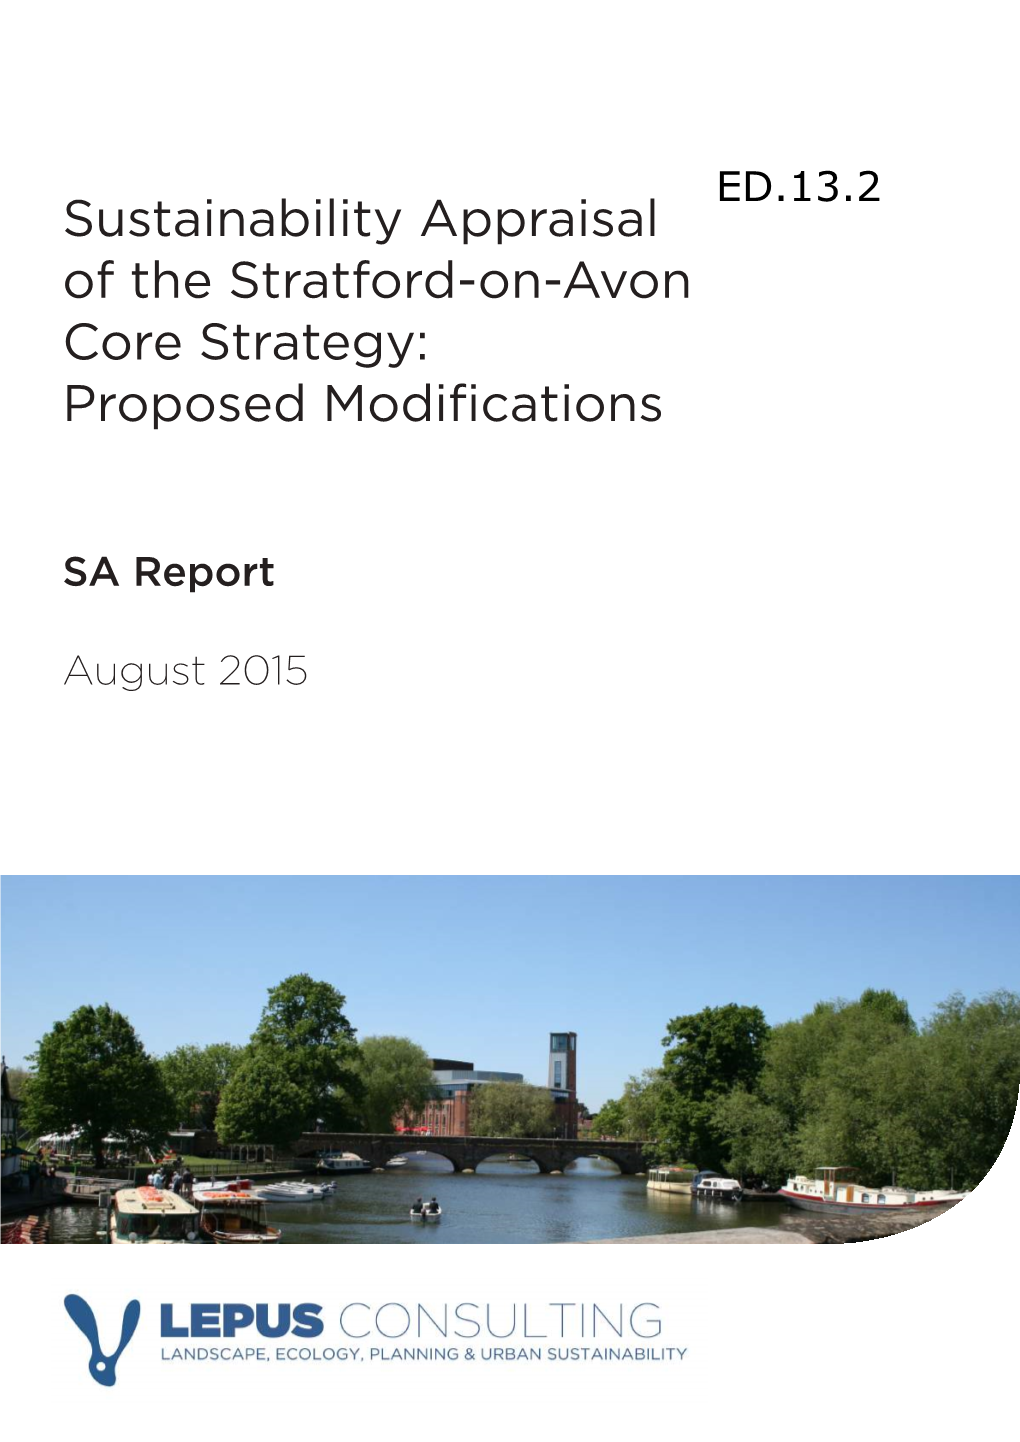 Sustainability Appraisal of the Stratford-On-Avon Core Strategy: Proposed Modiﬁcations